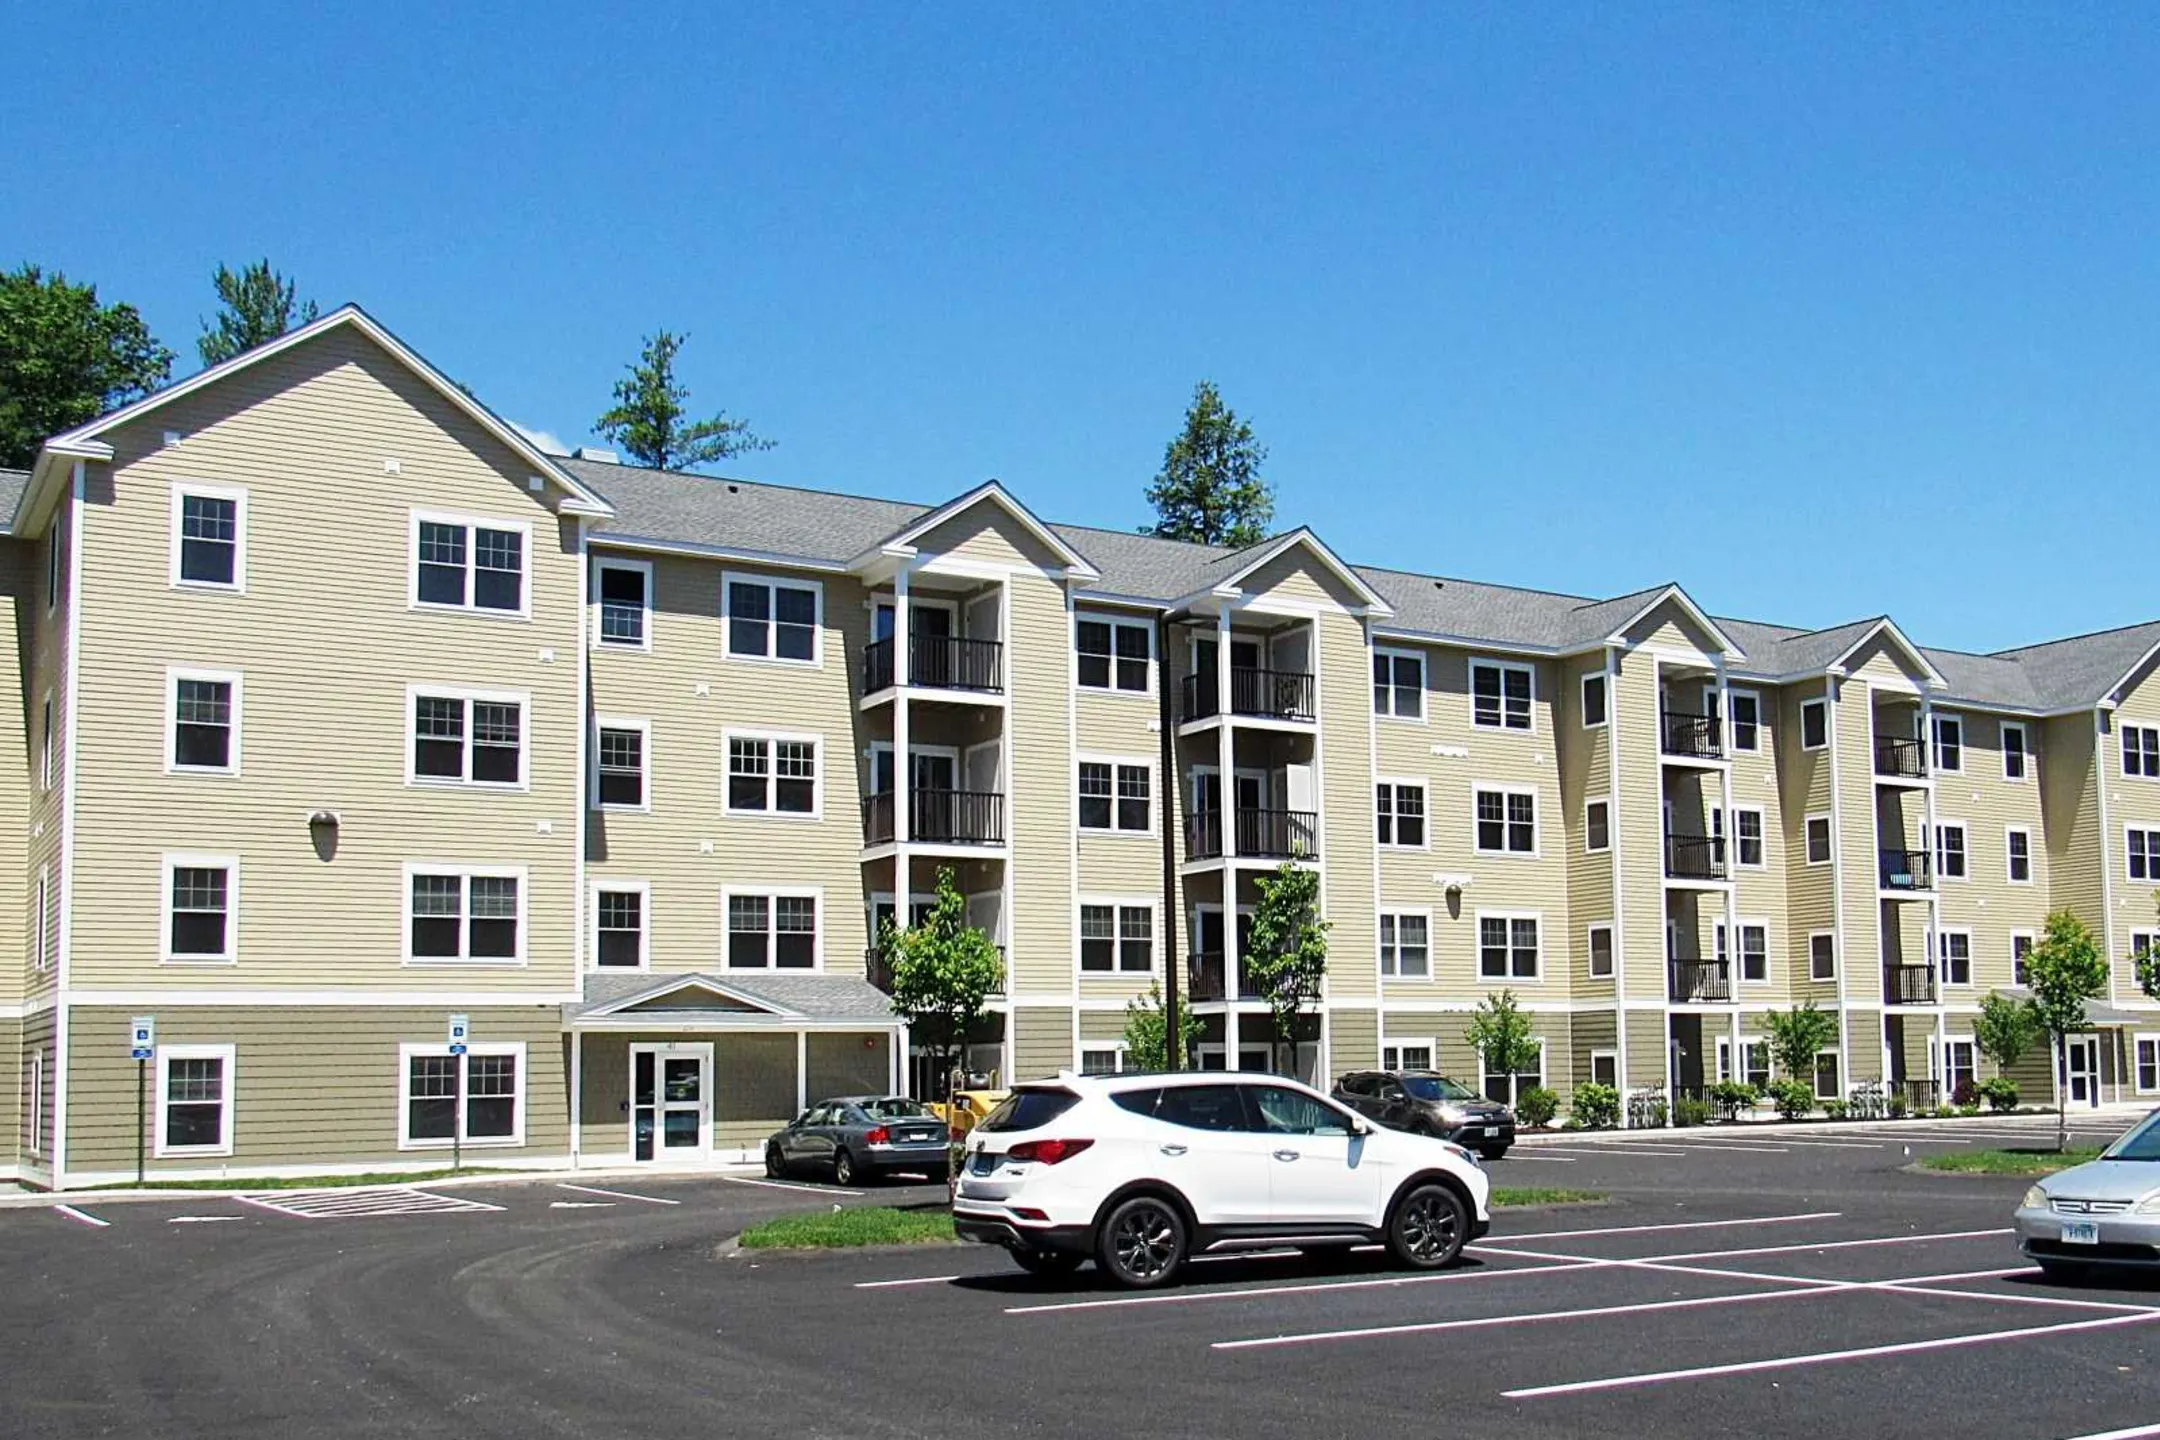 Building - The Residences at Colcord Pond - Exeter, NH